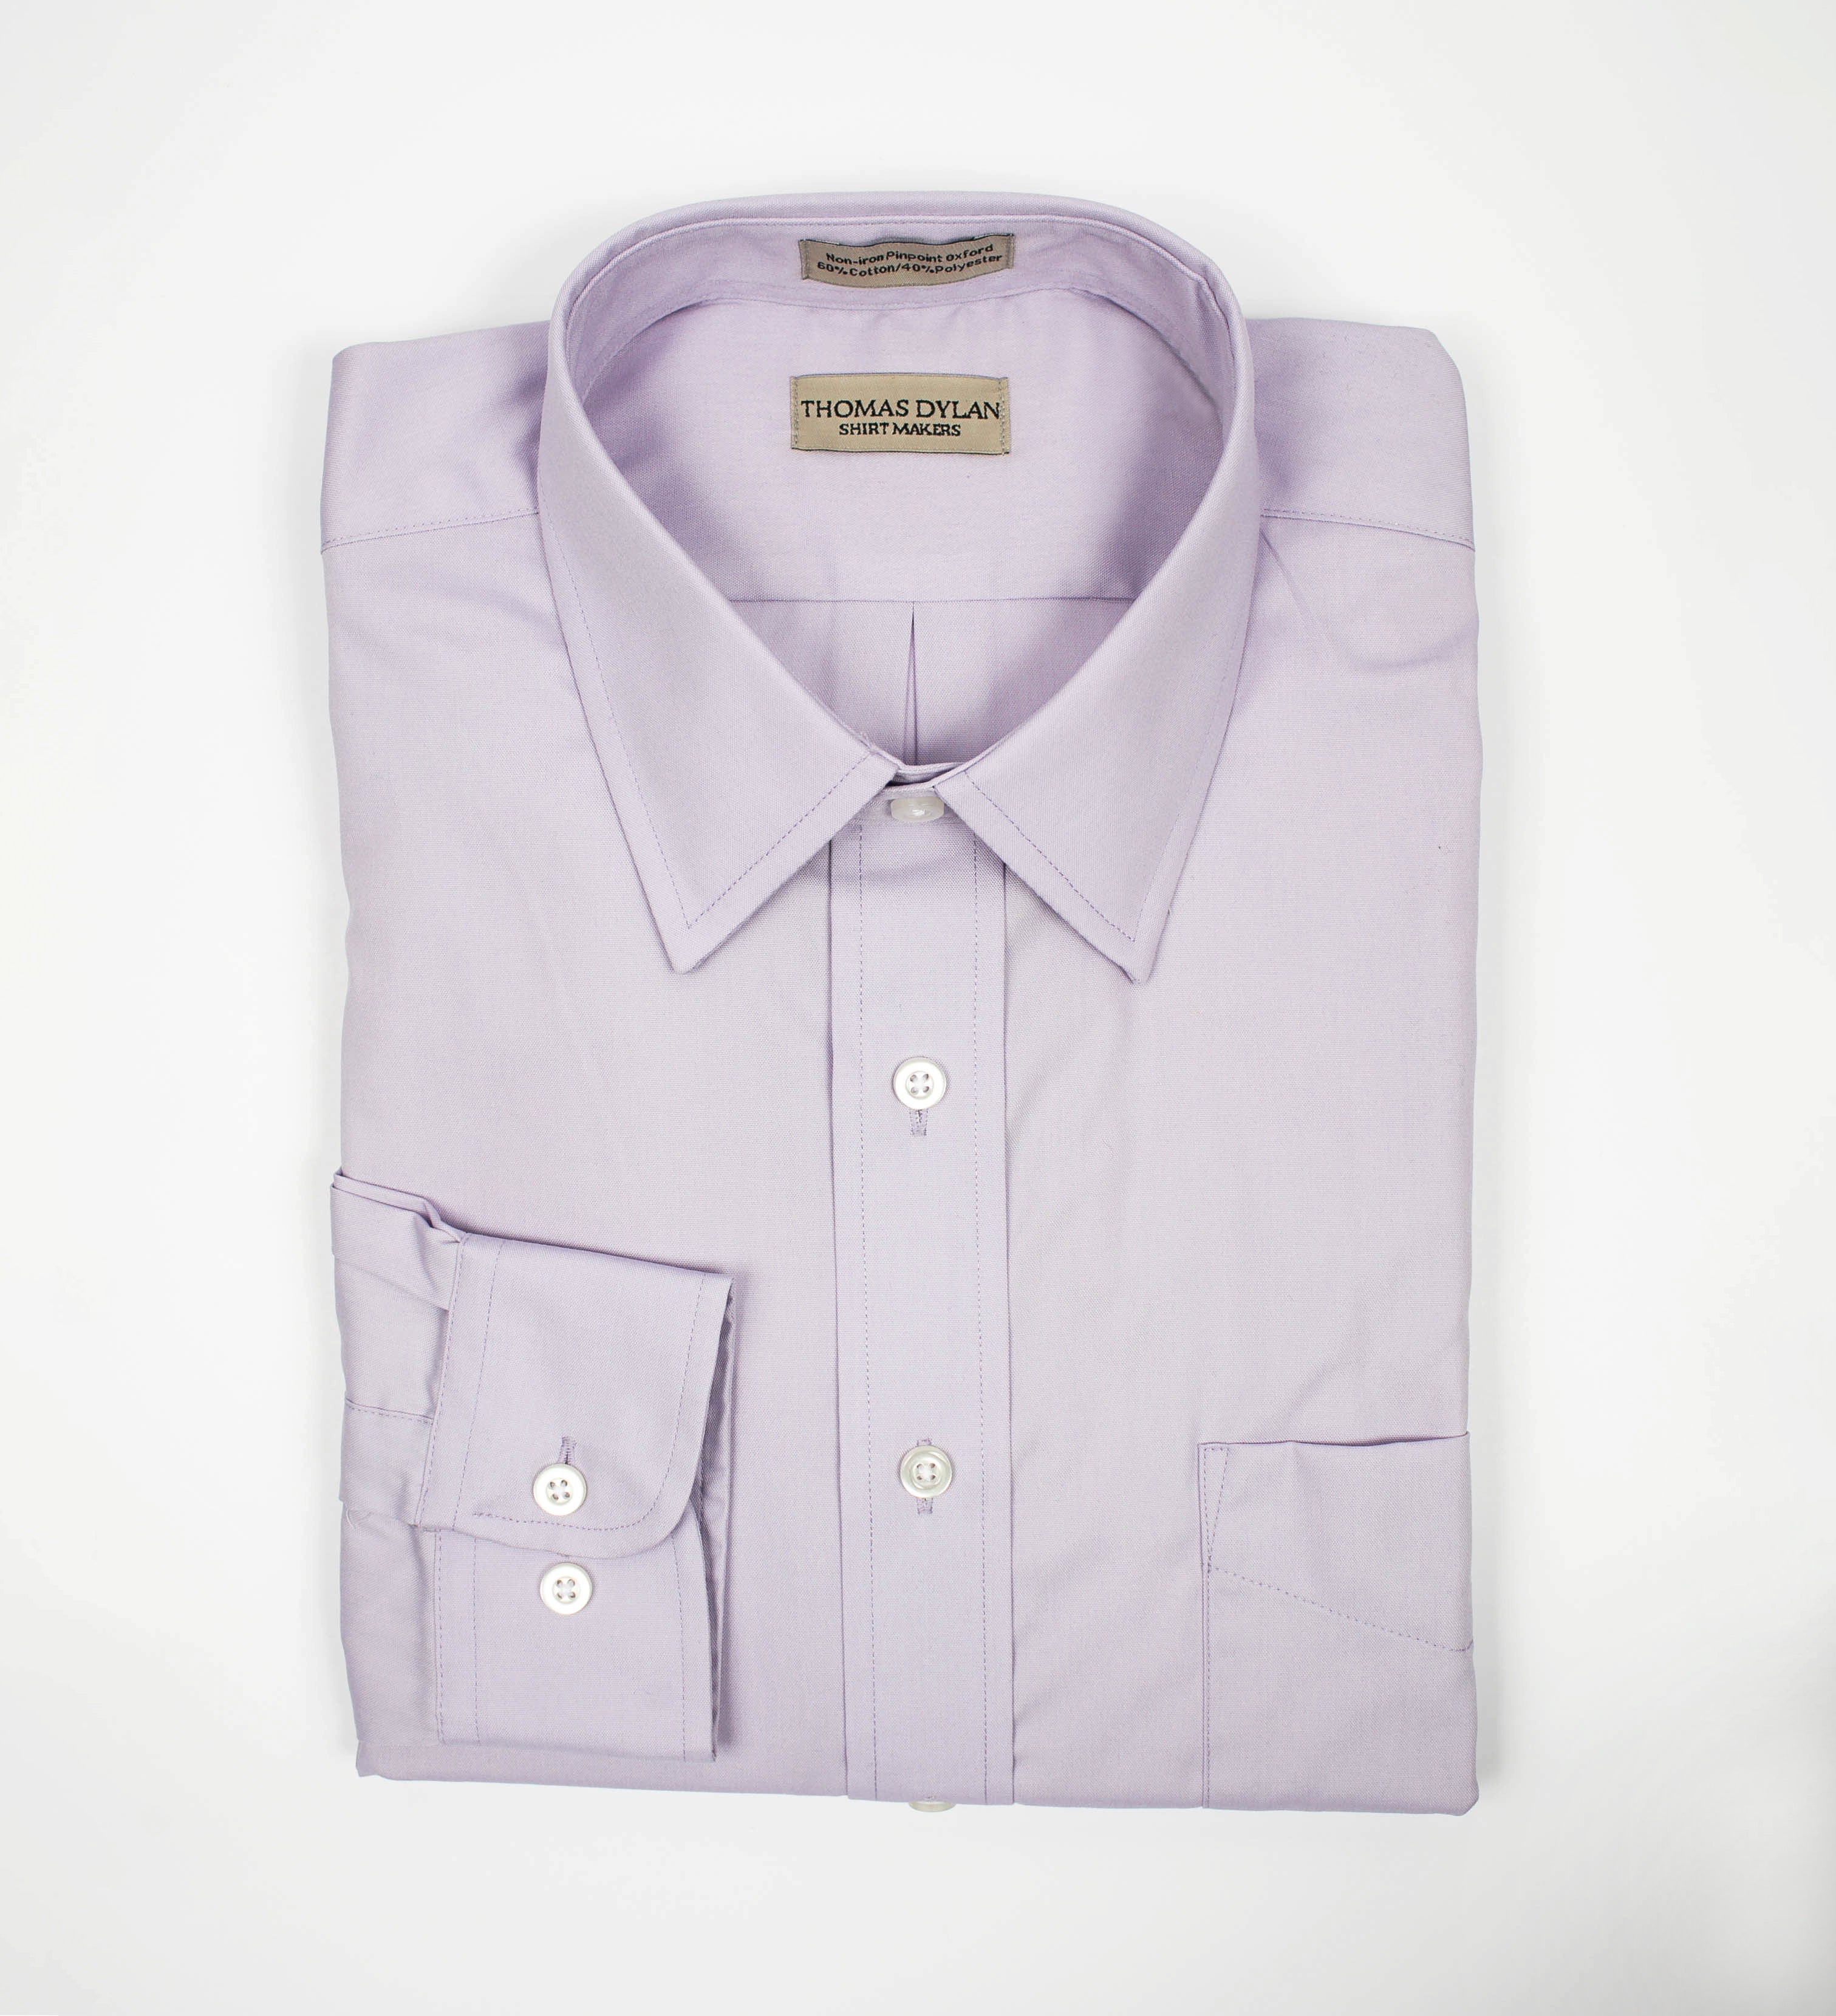 133 ZZ TF SC - Thomas Dylan Lavender Tailored Fit Spread Collar